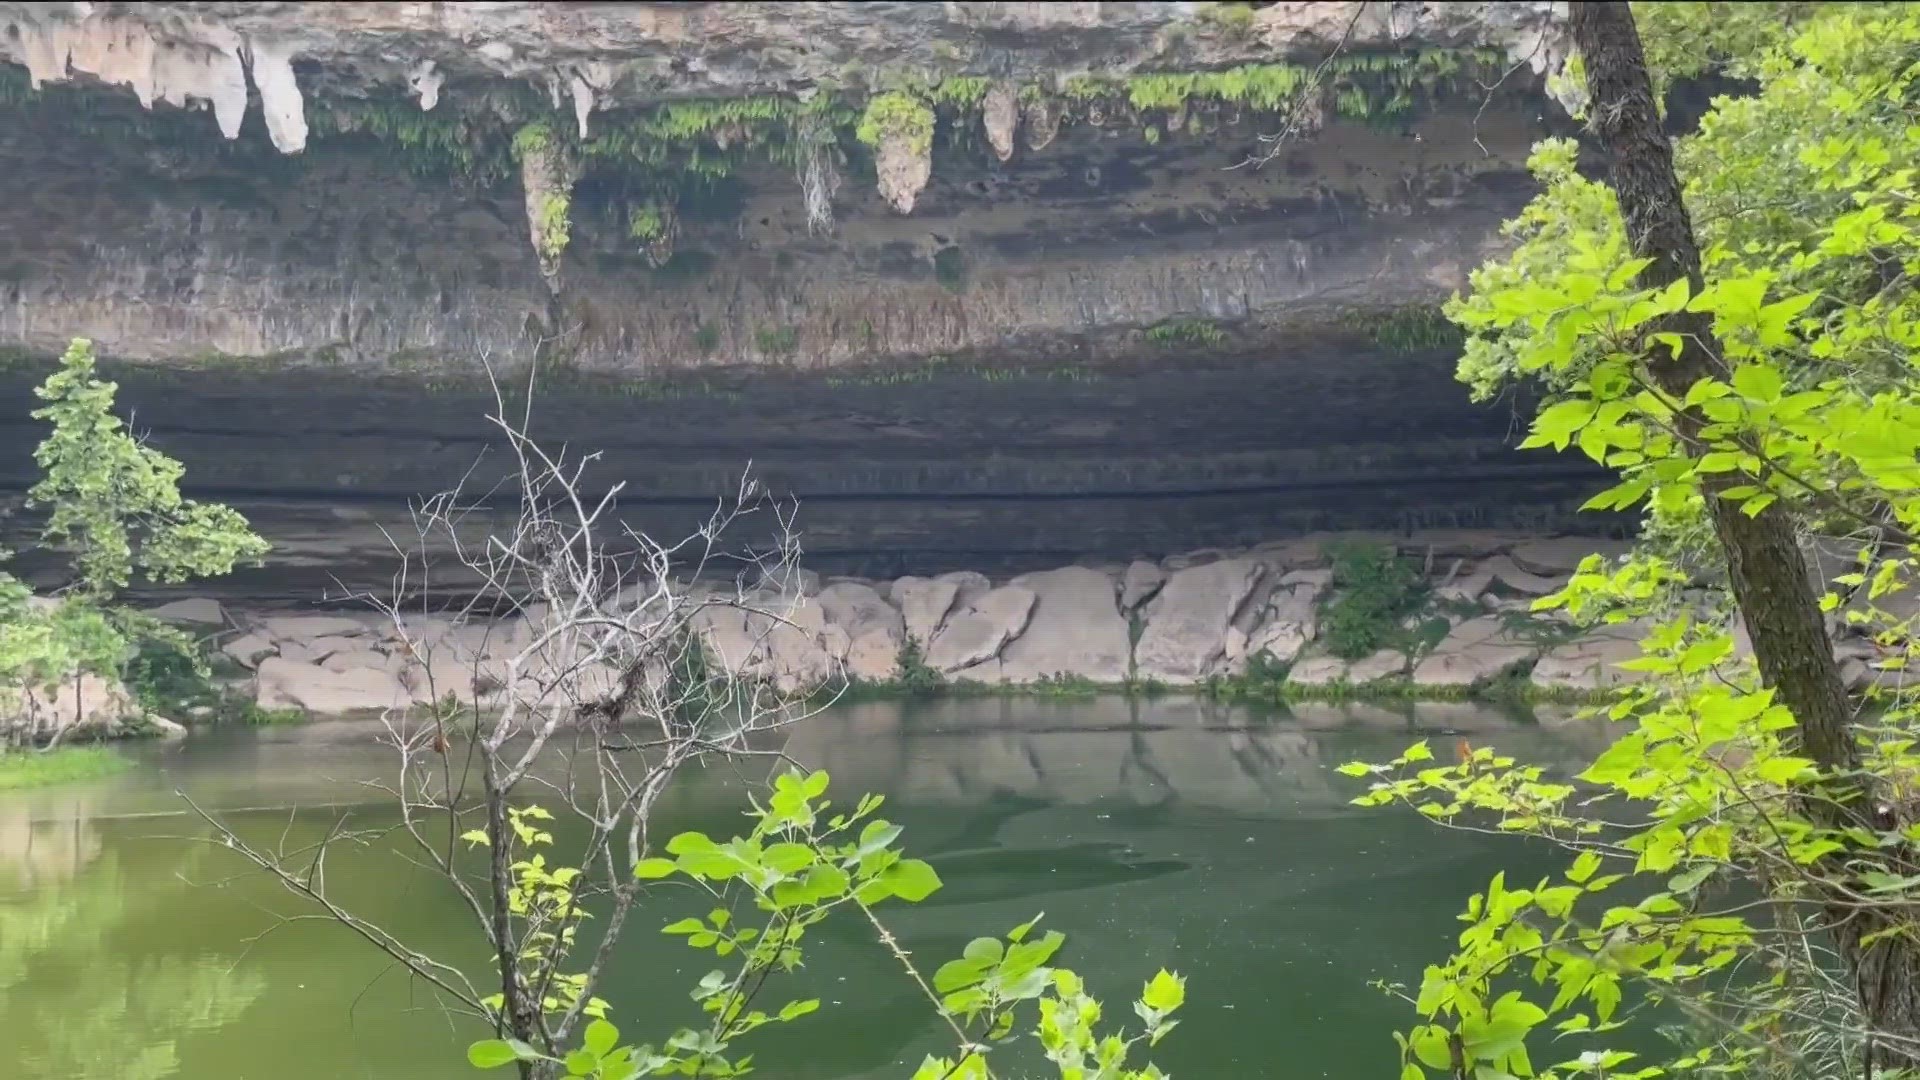 Travis County Parks said the earliest that swimming might be allowed at Hamilton Pool Preserve is Friday, June 16. The preserve remains open for hiking.